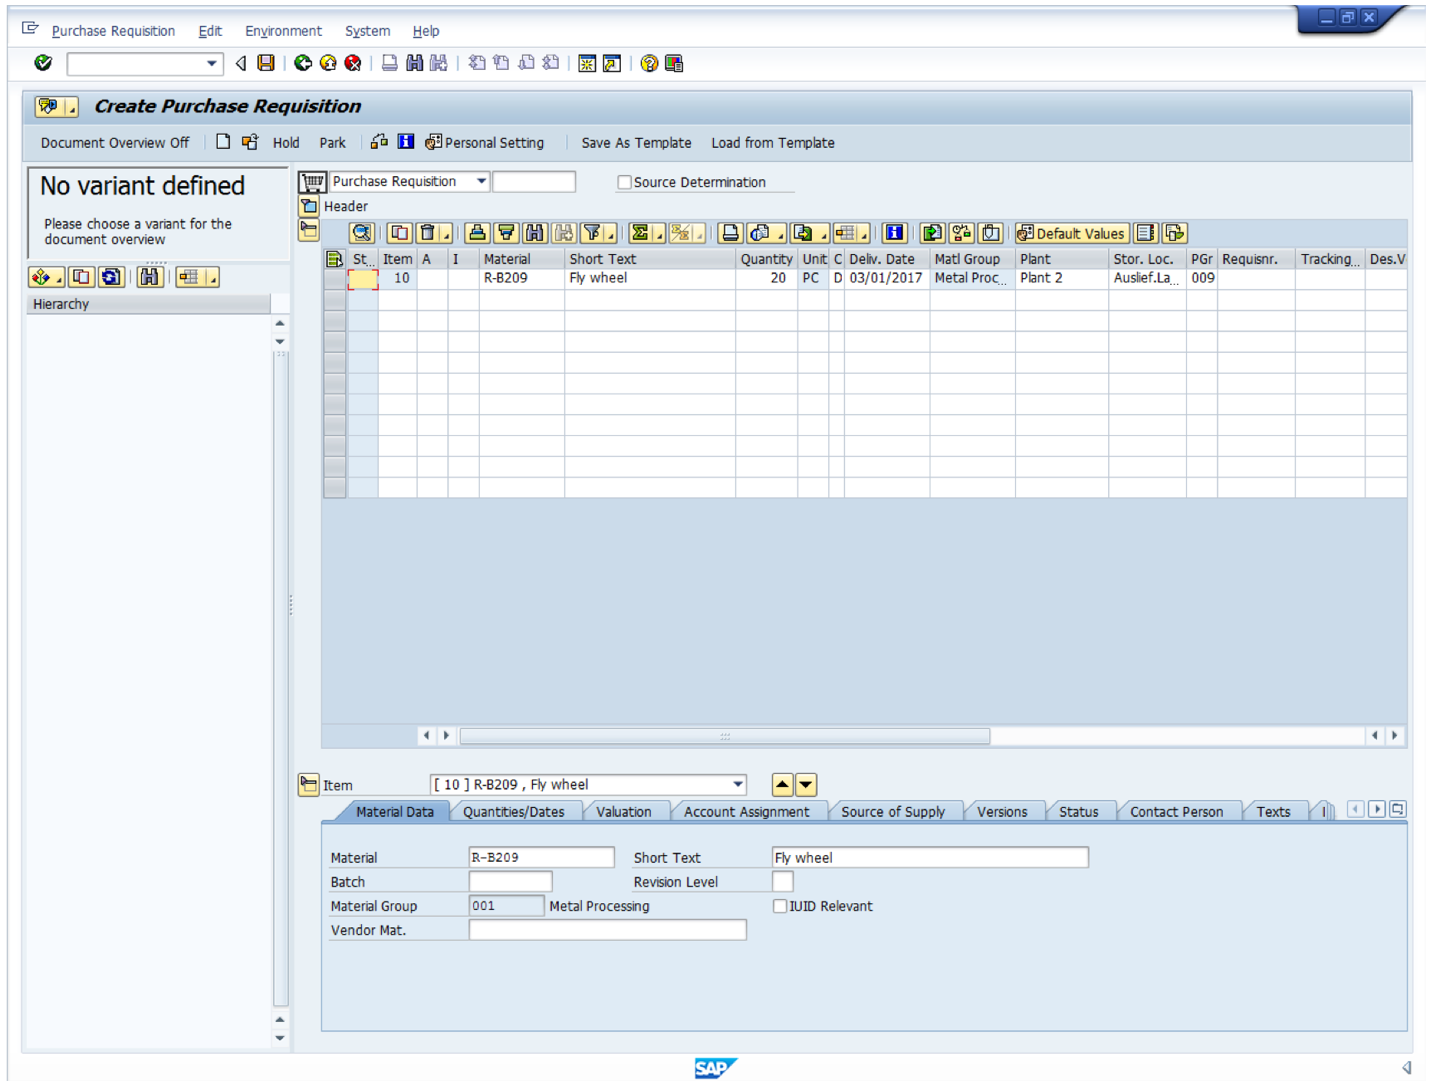 Use of the Material Master Record to Create SAP Purchase Requisition